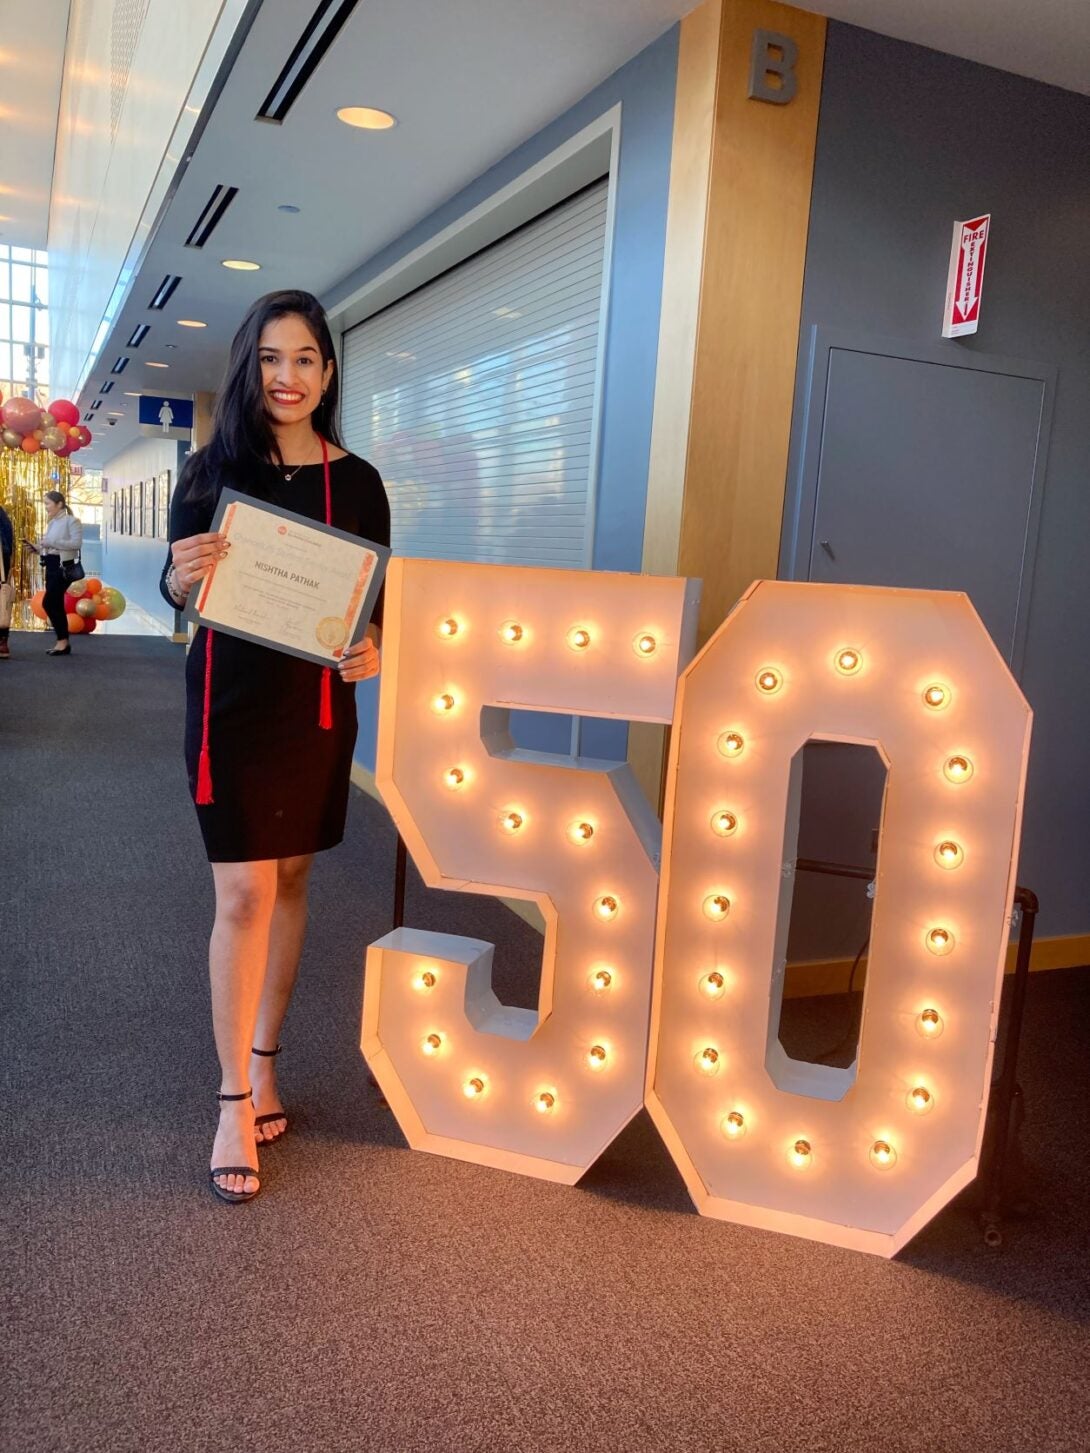 Nishtha Pathak received the UIC Chancellor's Student Service Award the the 50th such ceremony in Chicago.